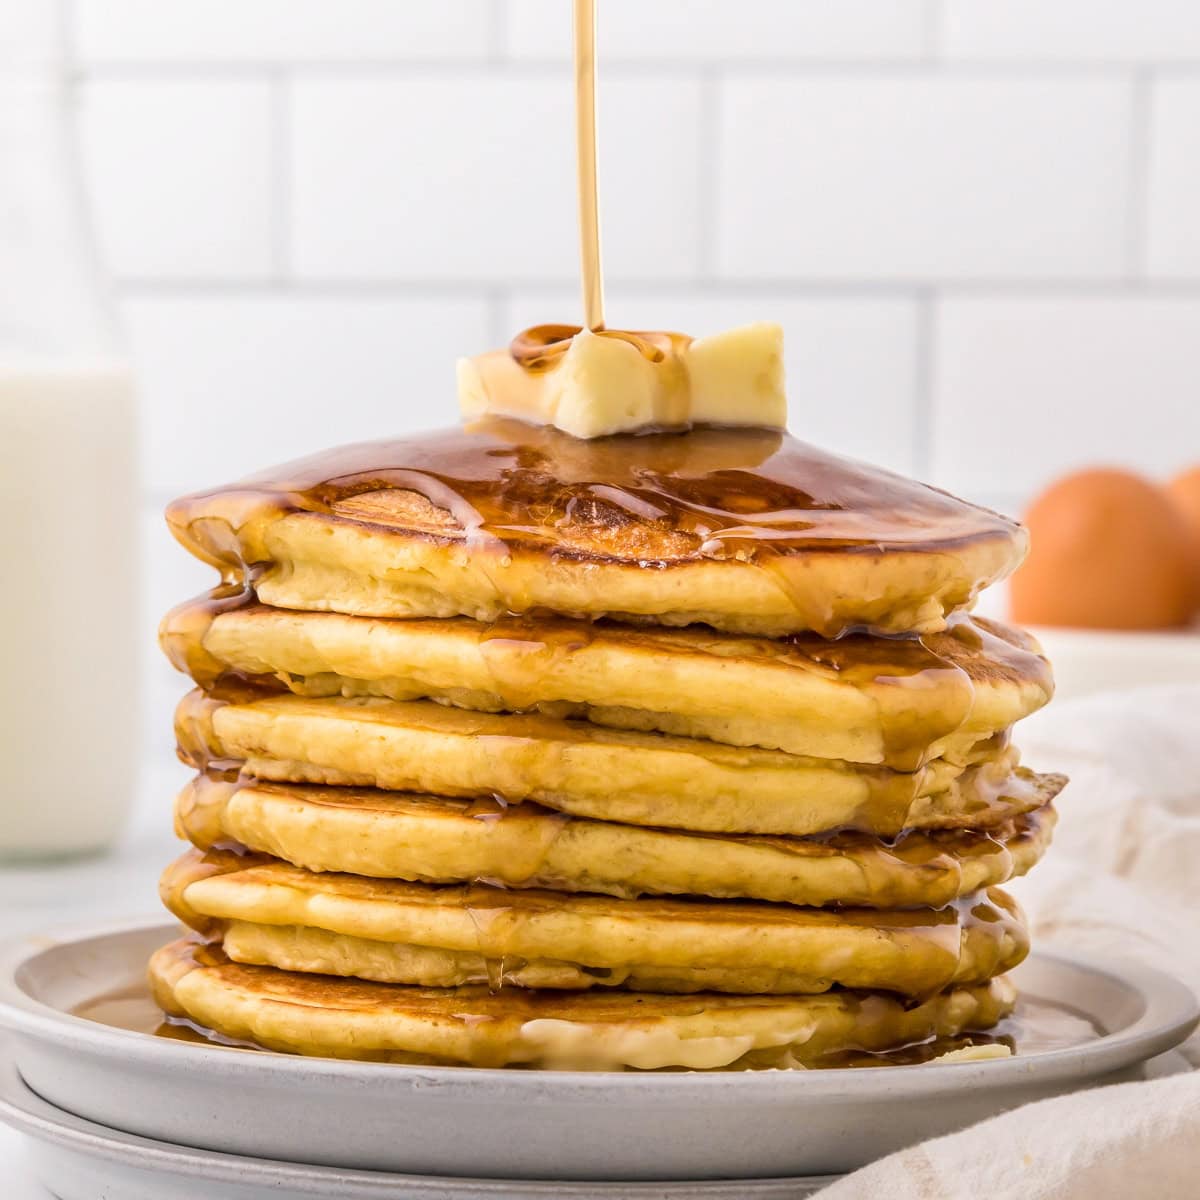 Picture of pancakes stacked with homemade syrup being poured over them.